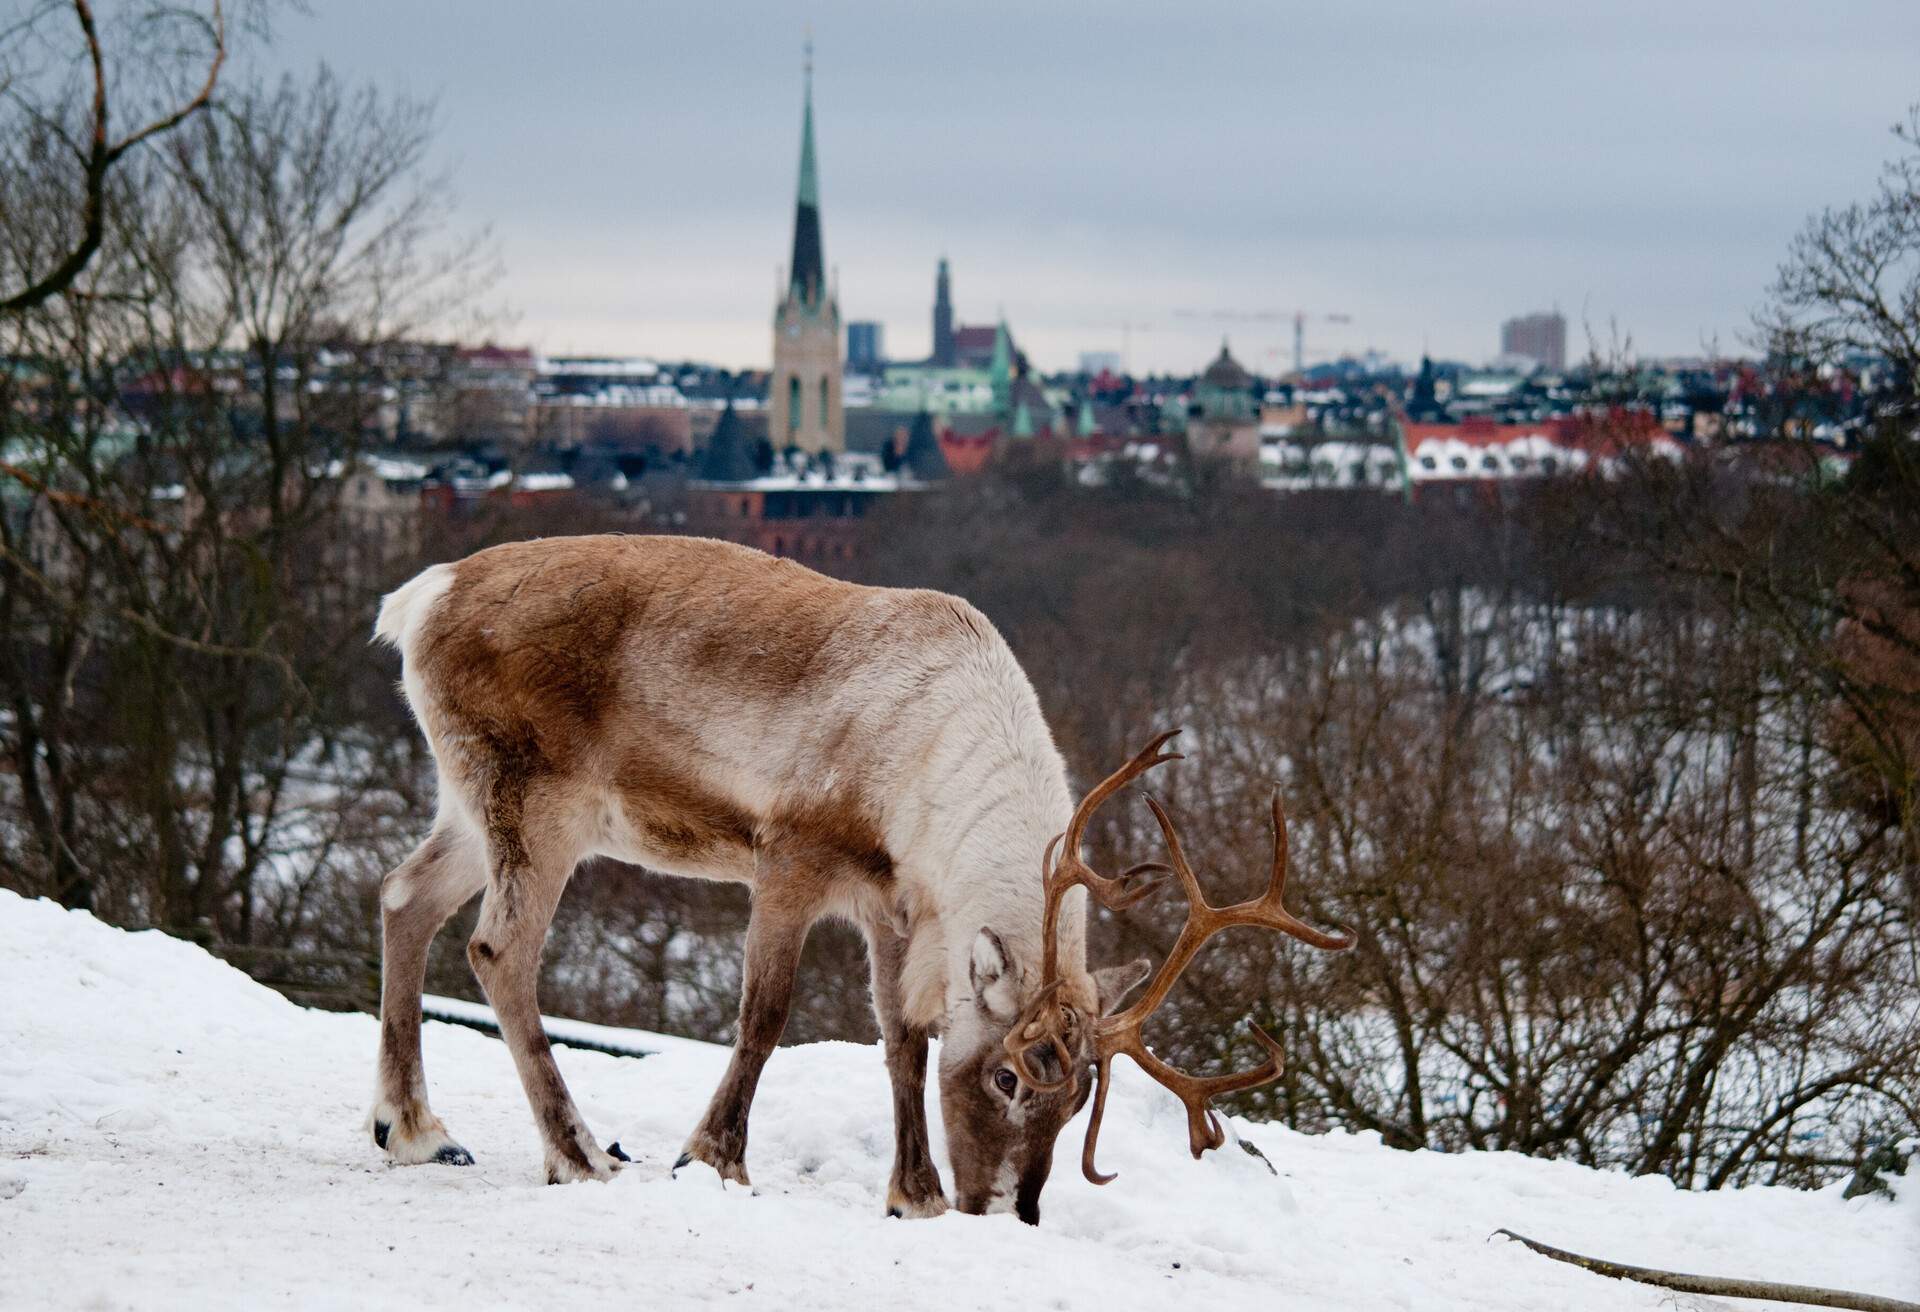 A deer in Skansen park with a view of Stockholm behind.